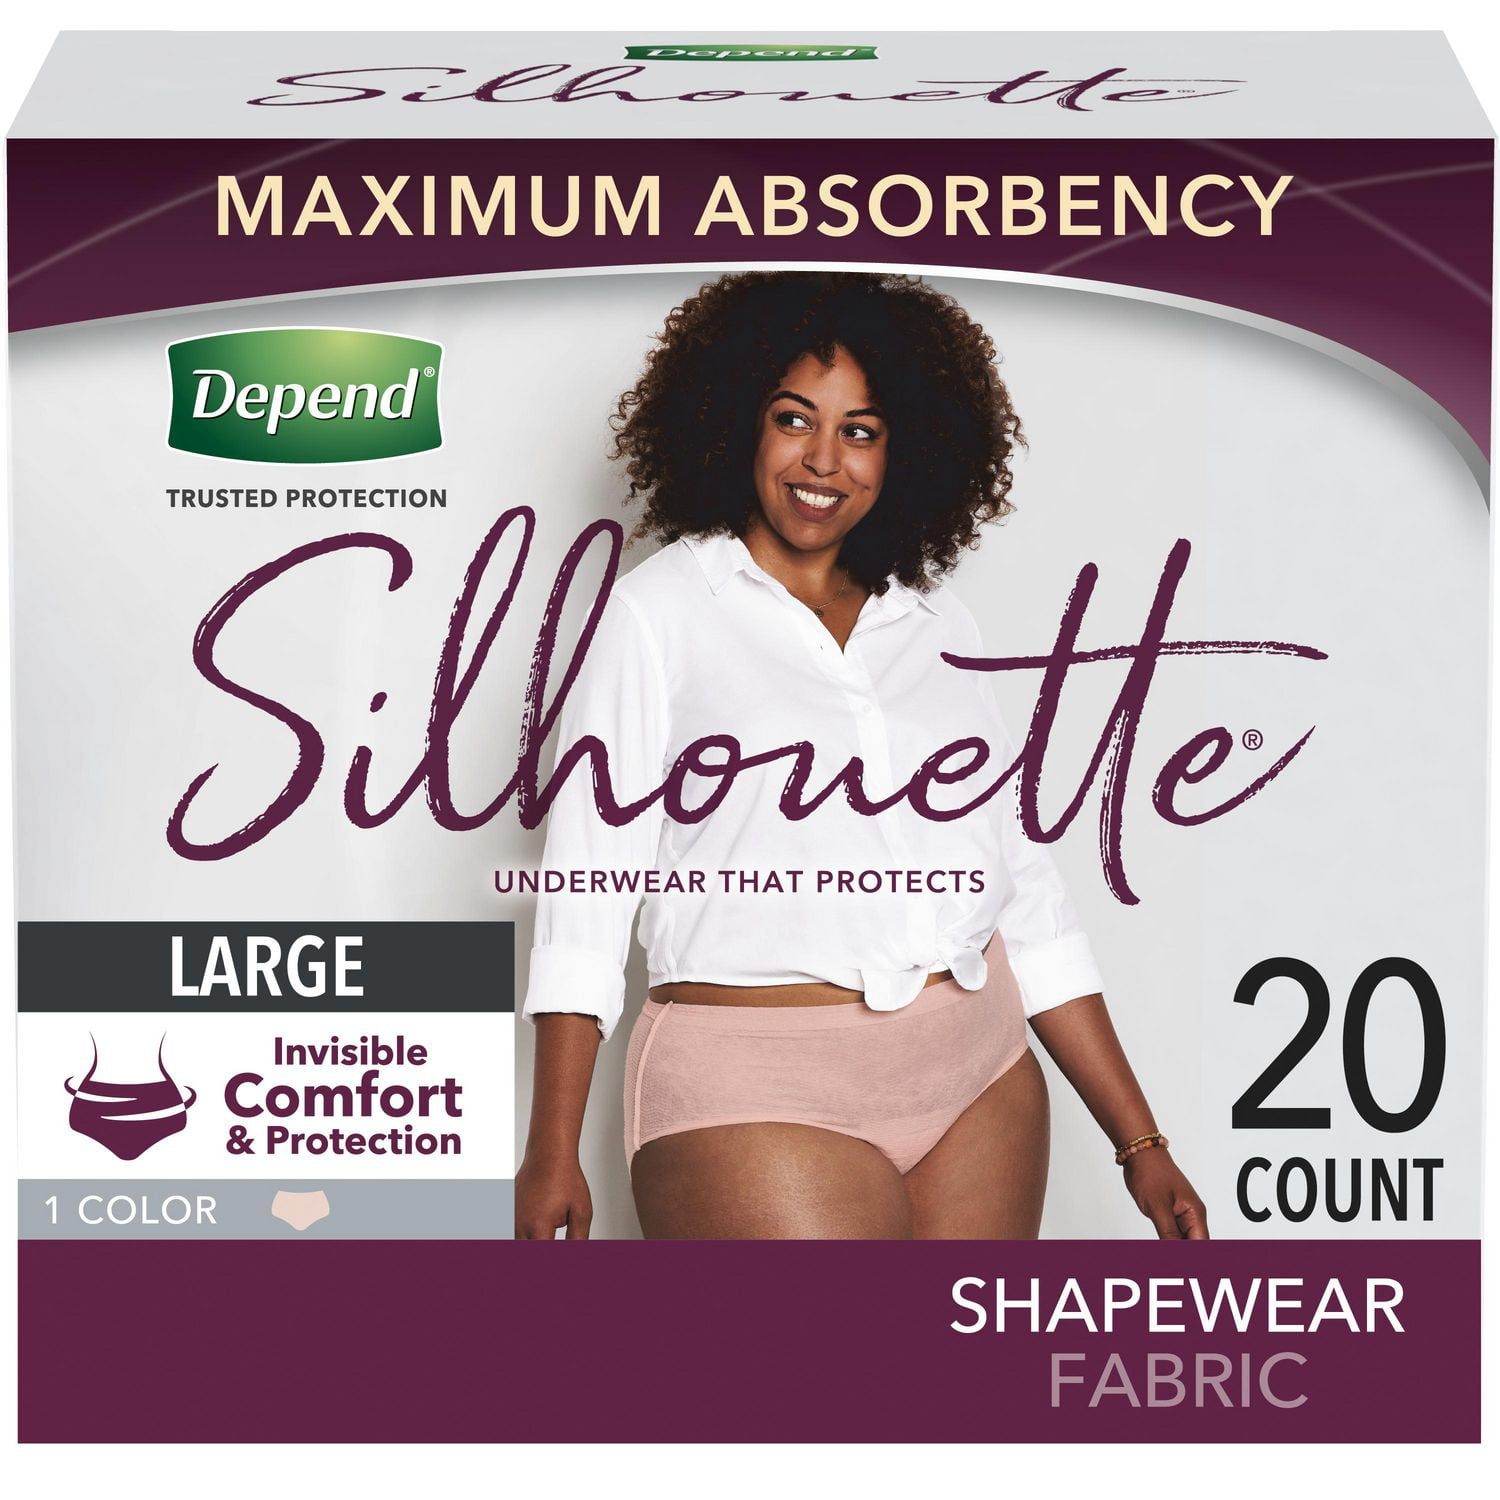 Save on Depend Women's Fresh Protection Incontinence Underwear